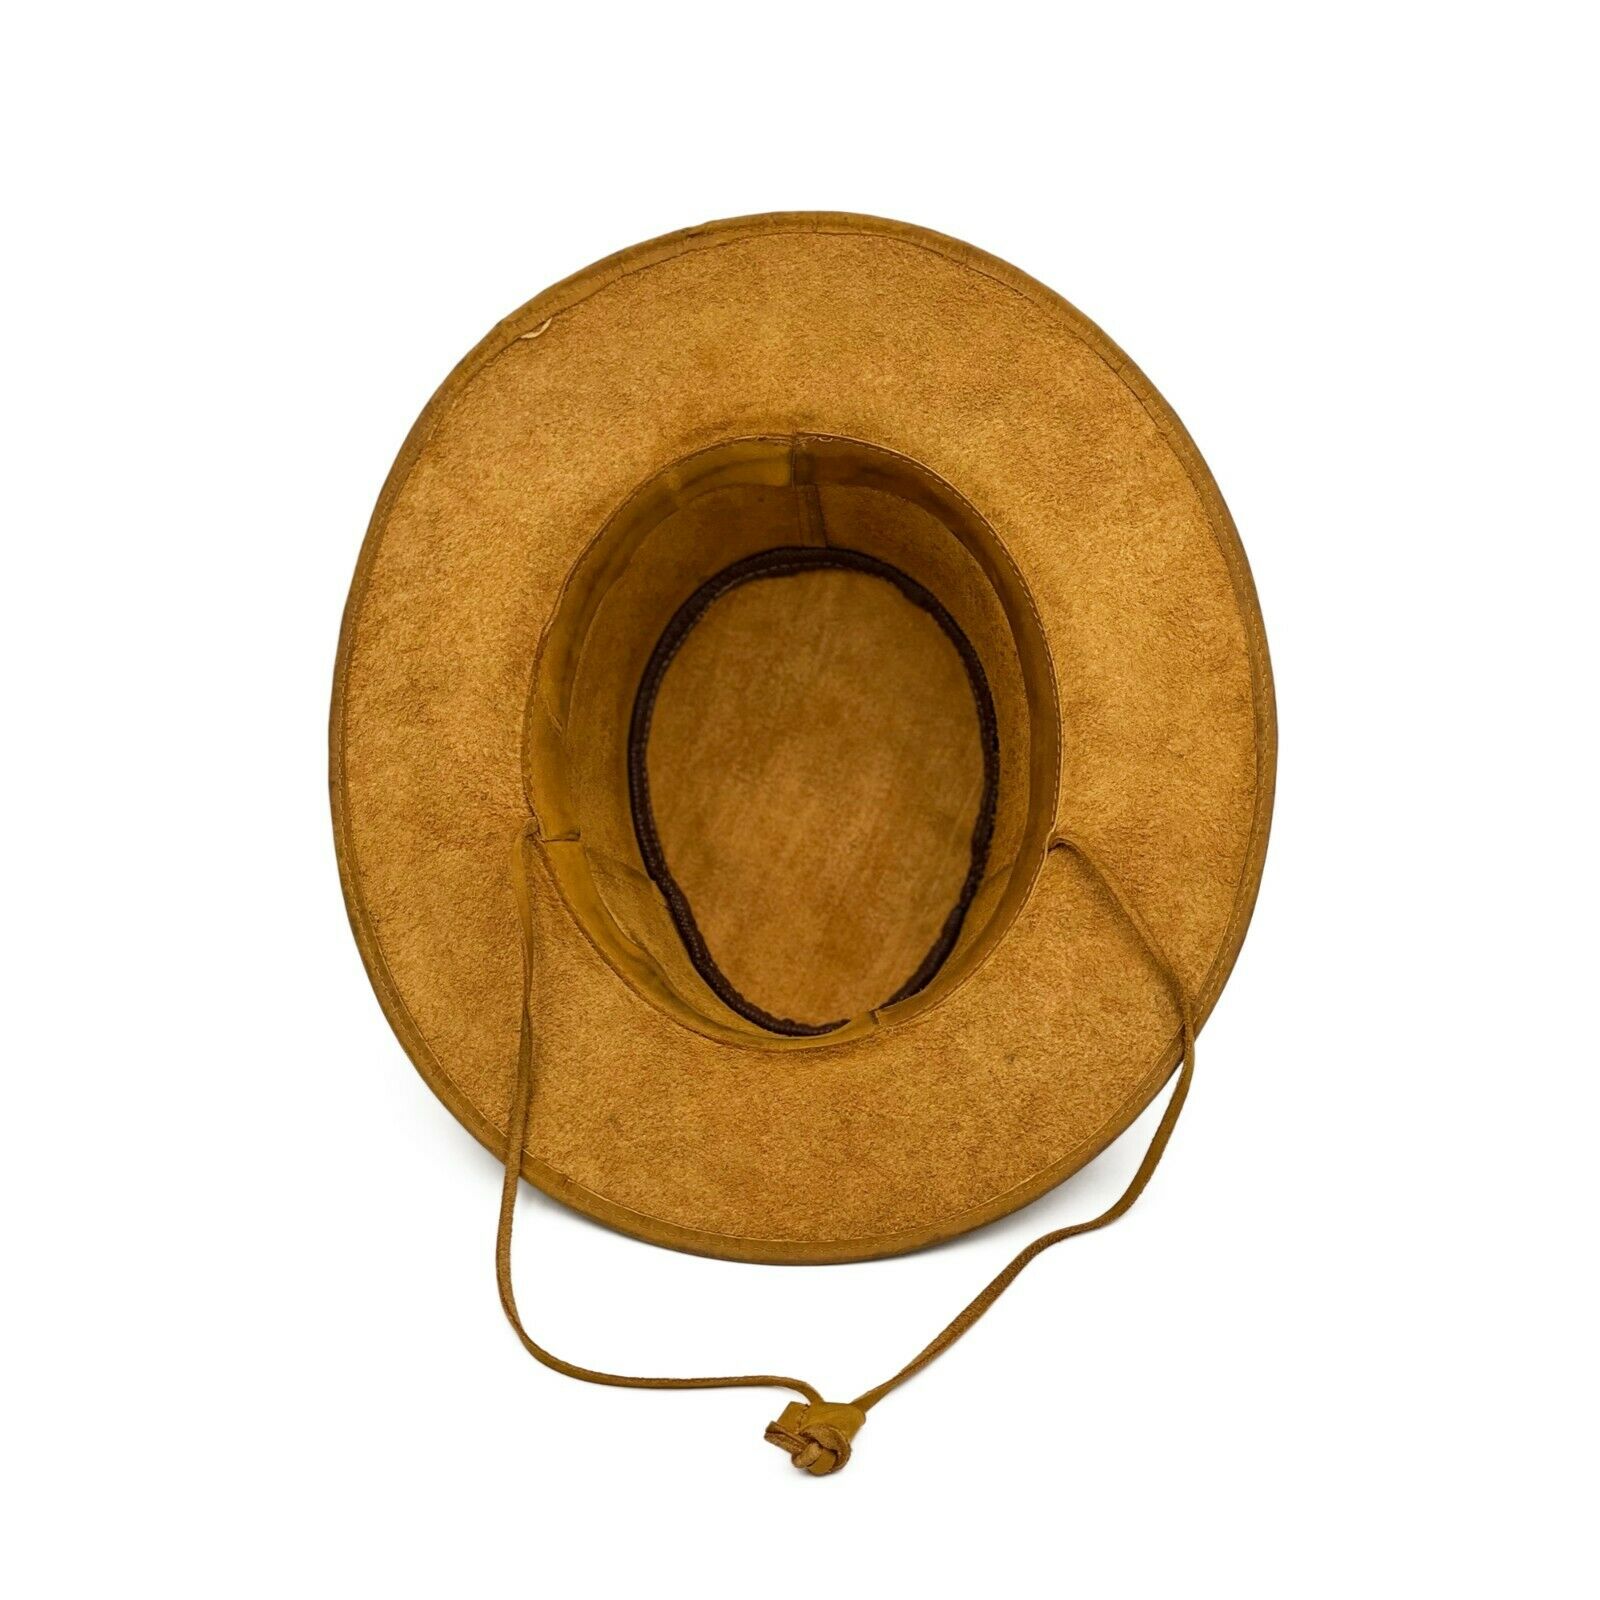 Handmade Genuine Leather Western Cowboy Hat - Clint Eastwood style - light brown color